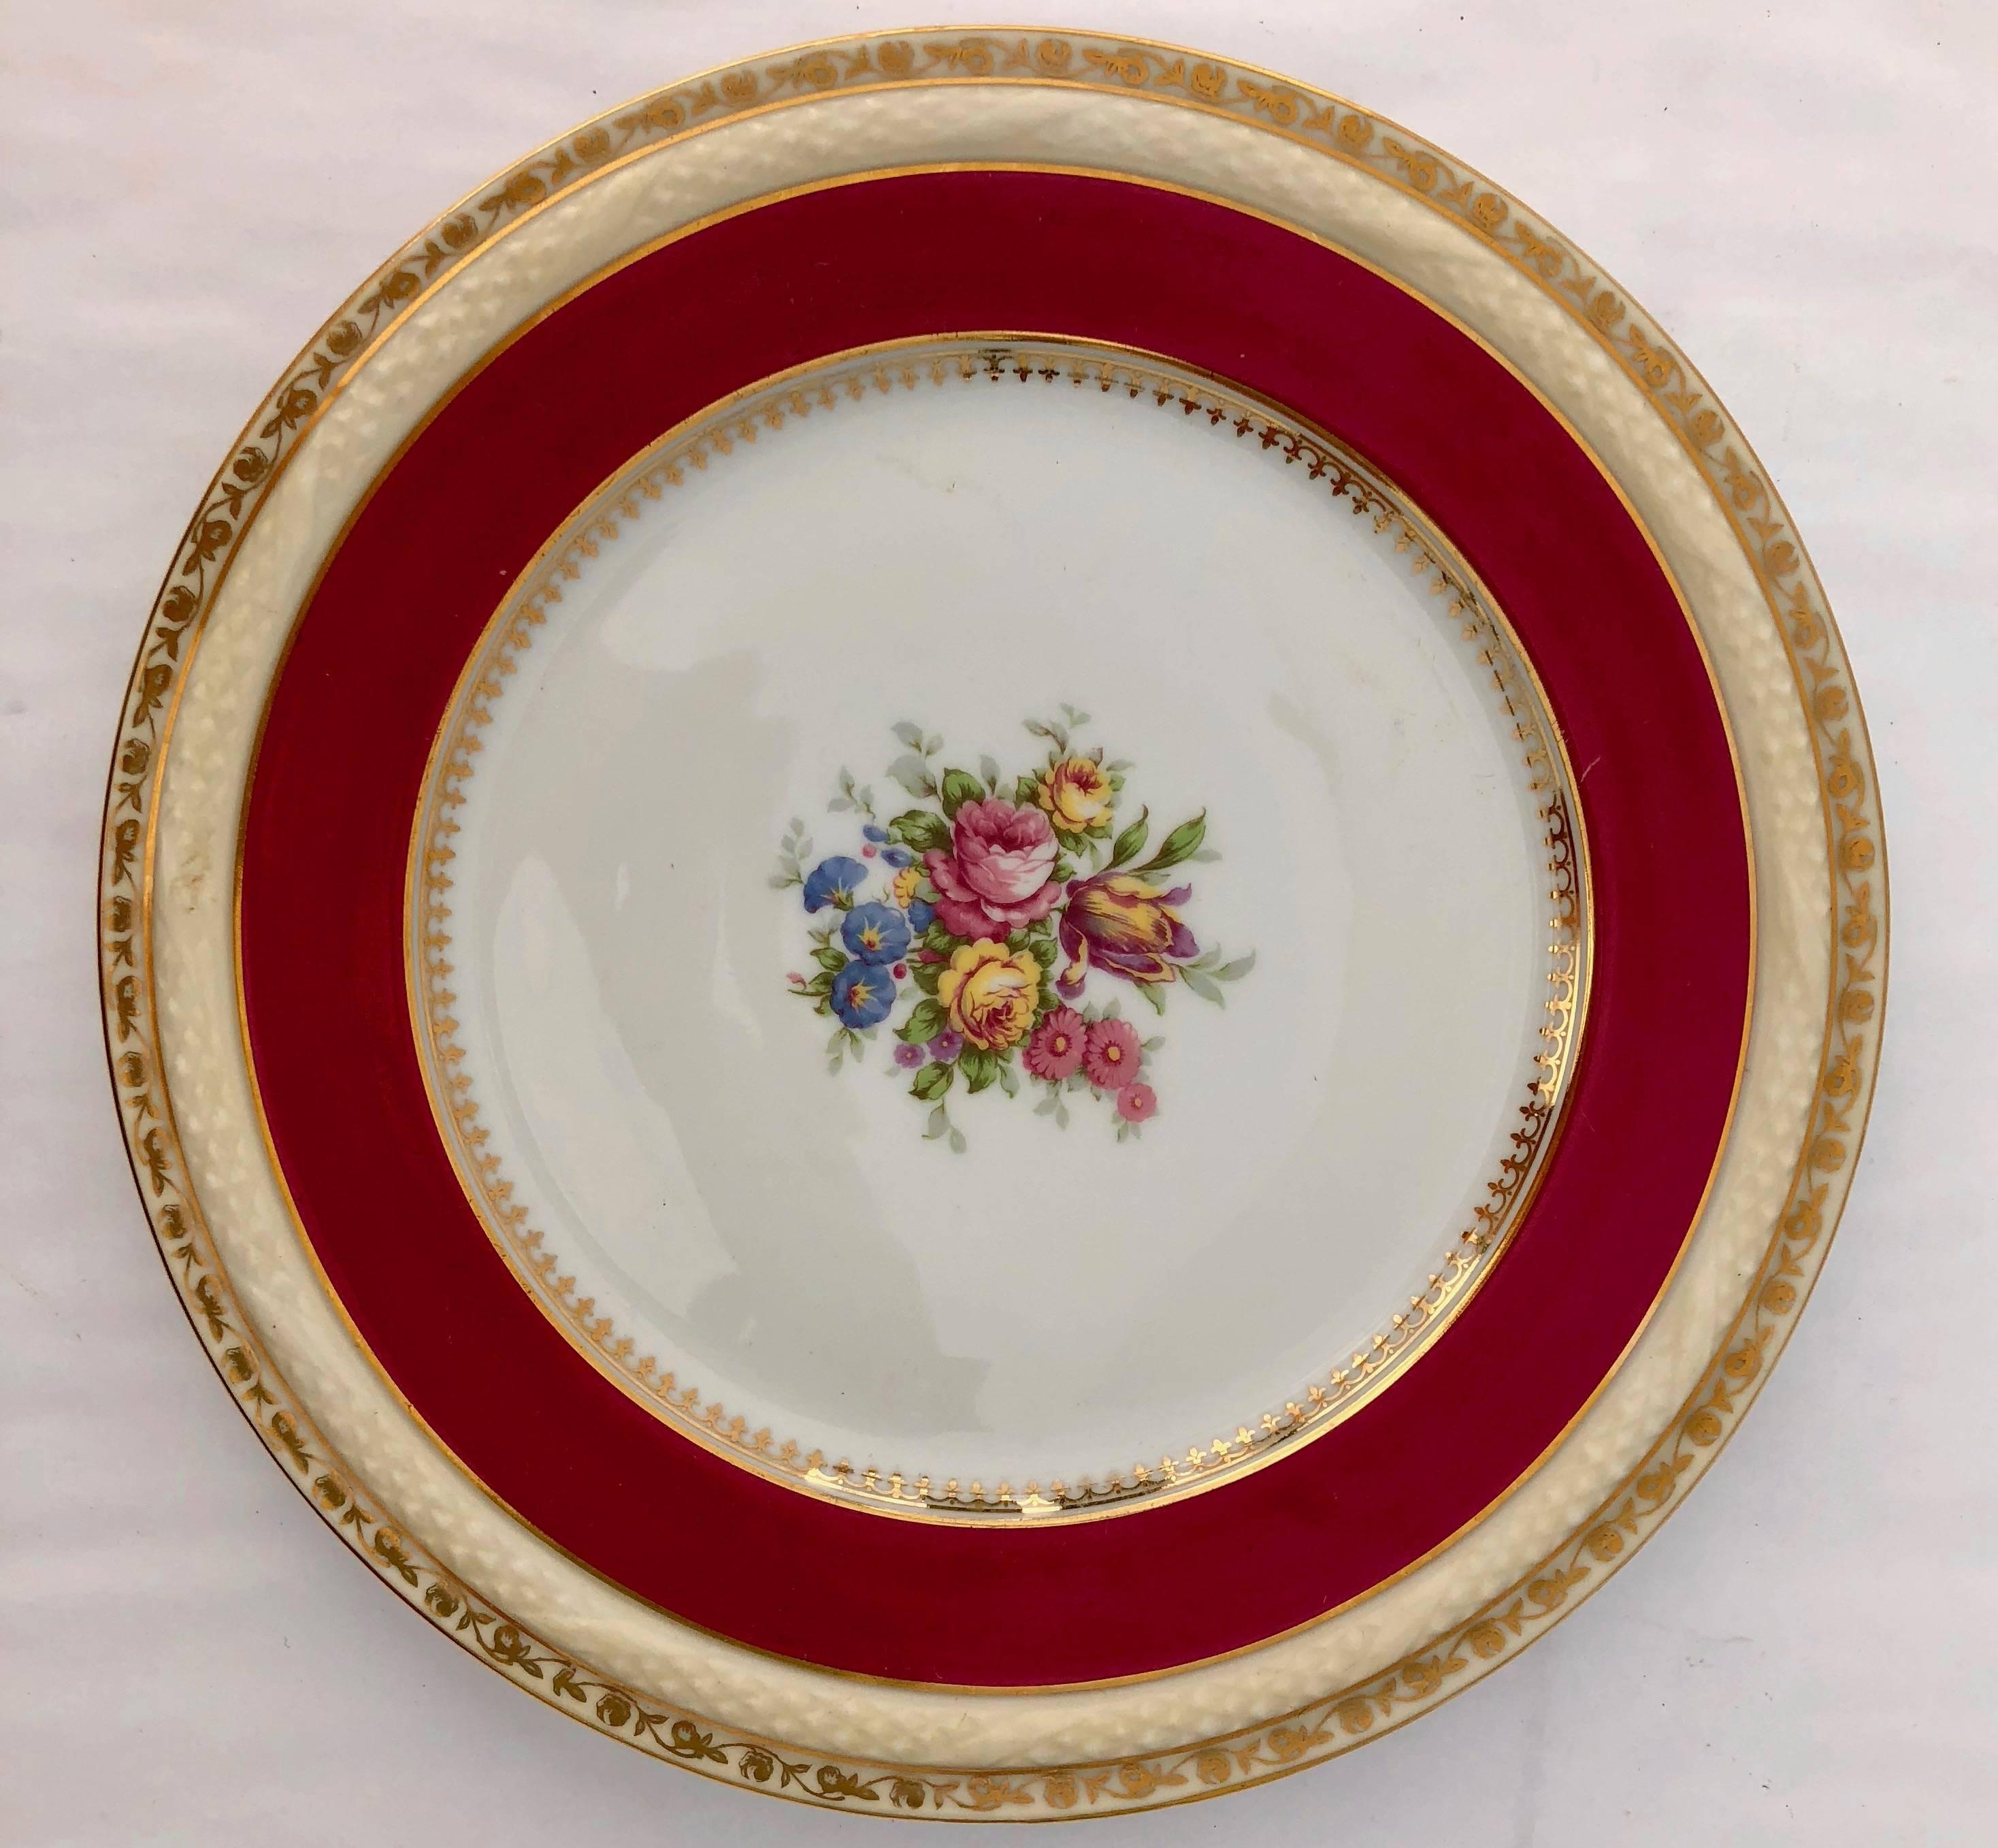 2 French Limoges Serving Plates, Hand-Painted Red, Gold with Decorative Flowers In Good Condition For Sale In Petaluma, CA